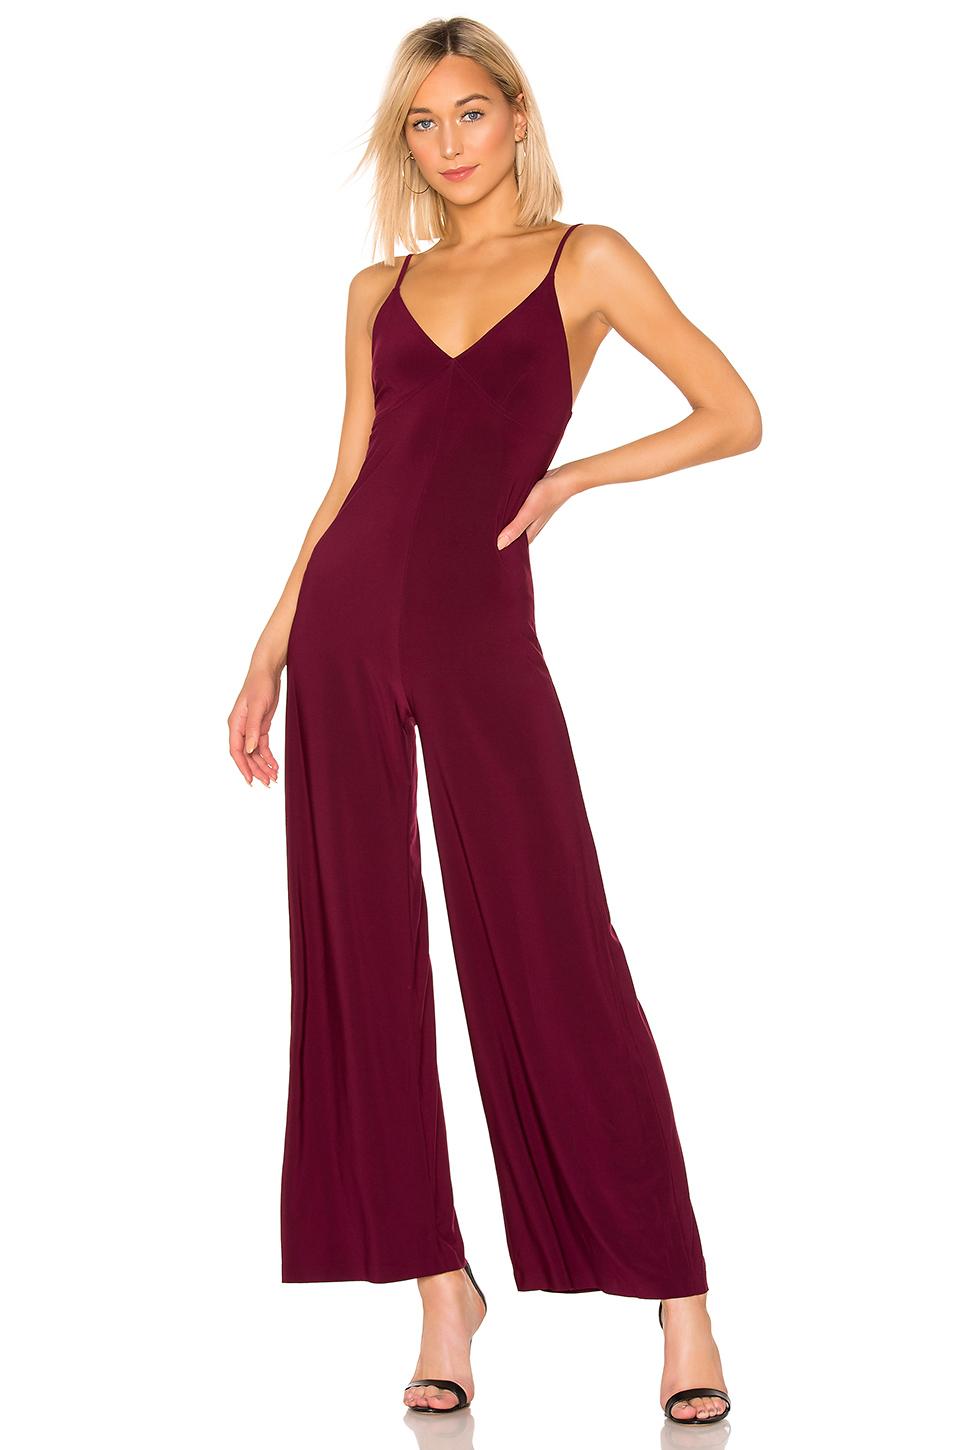 Norma Kamali Synthetic X Revolve Slip Jumpsuit in Plum (Red) - Lyst